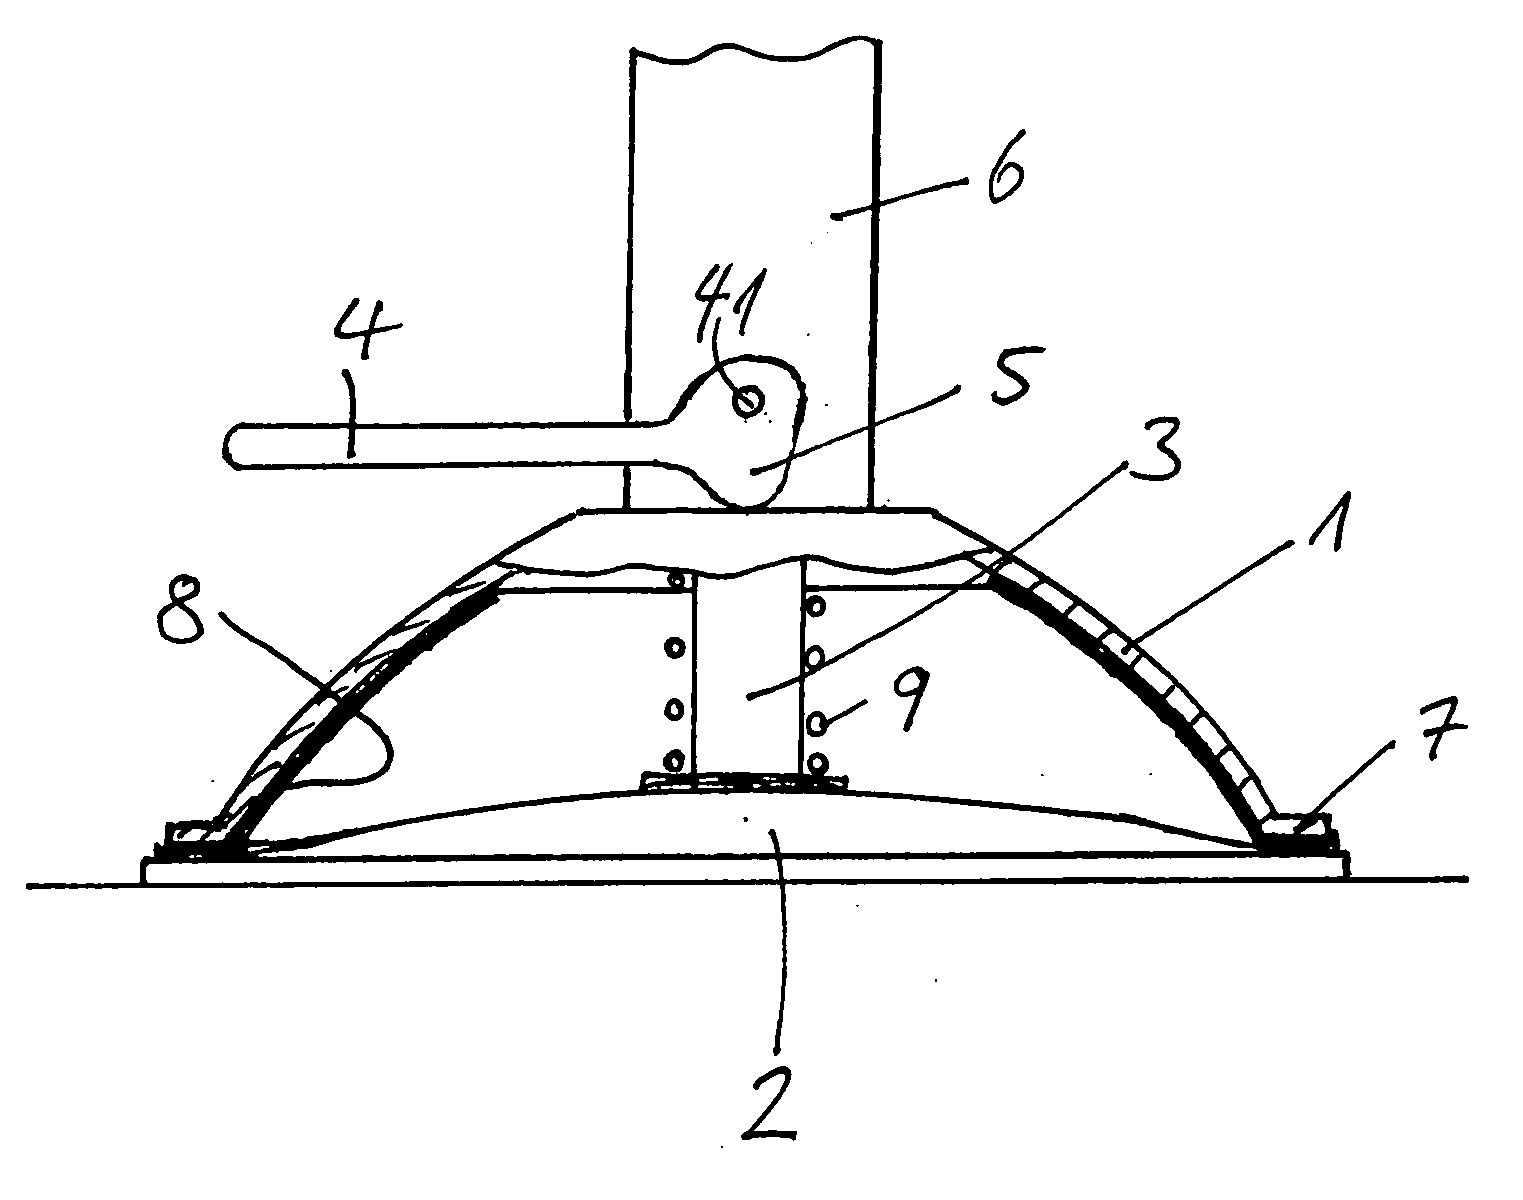 Suction base for an apparatus support device